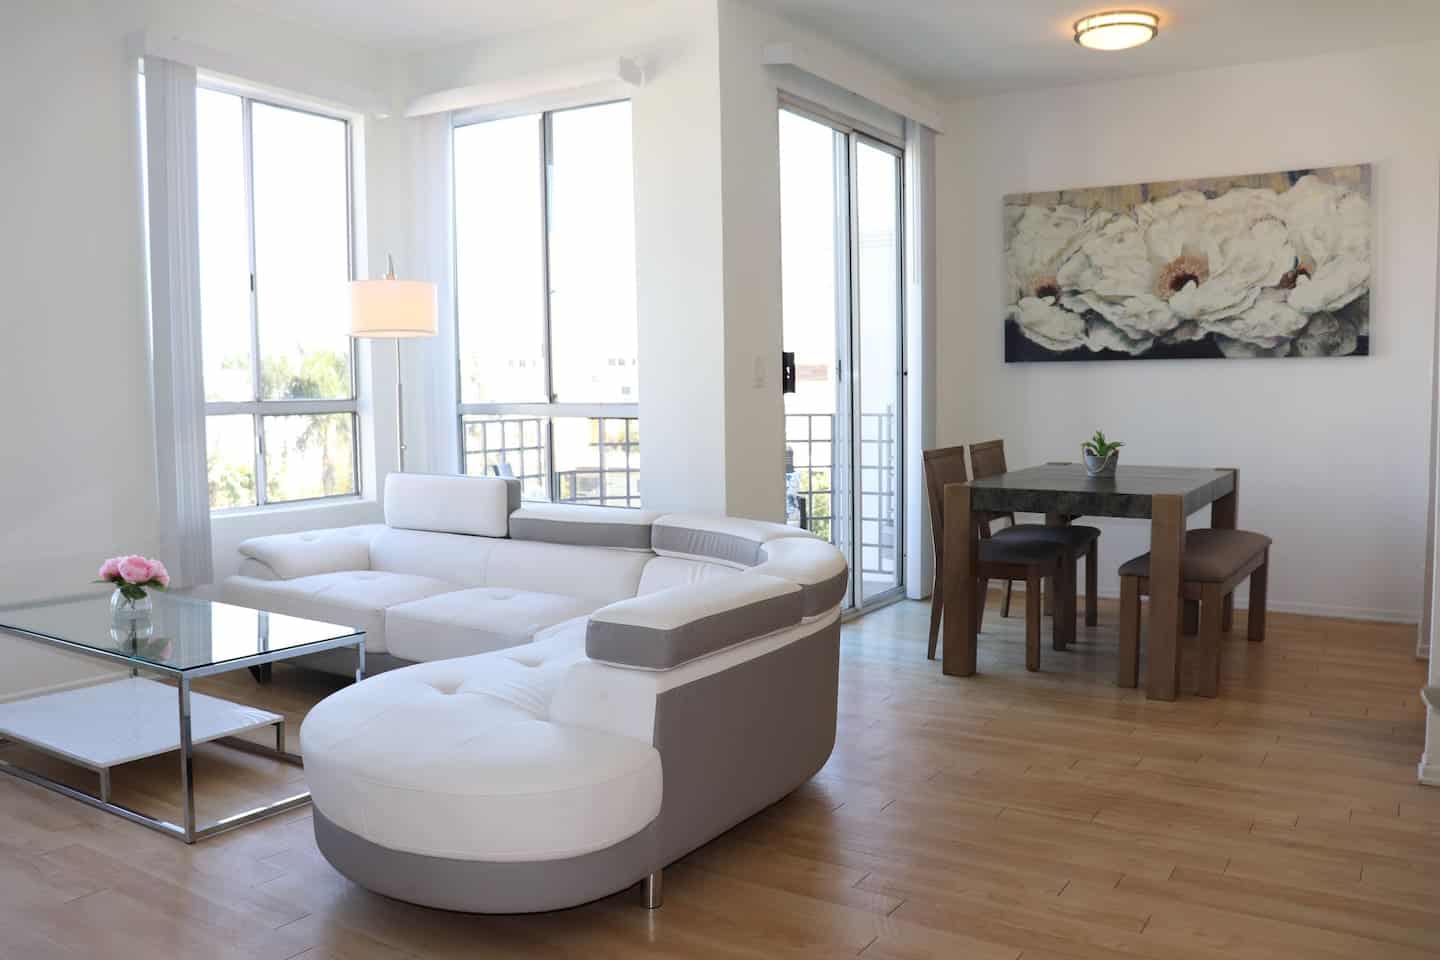 Image of Airbnb rental in West Hollywood, CA